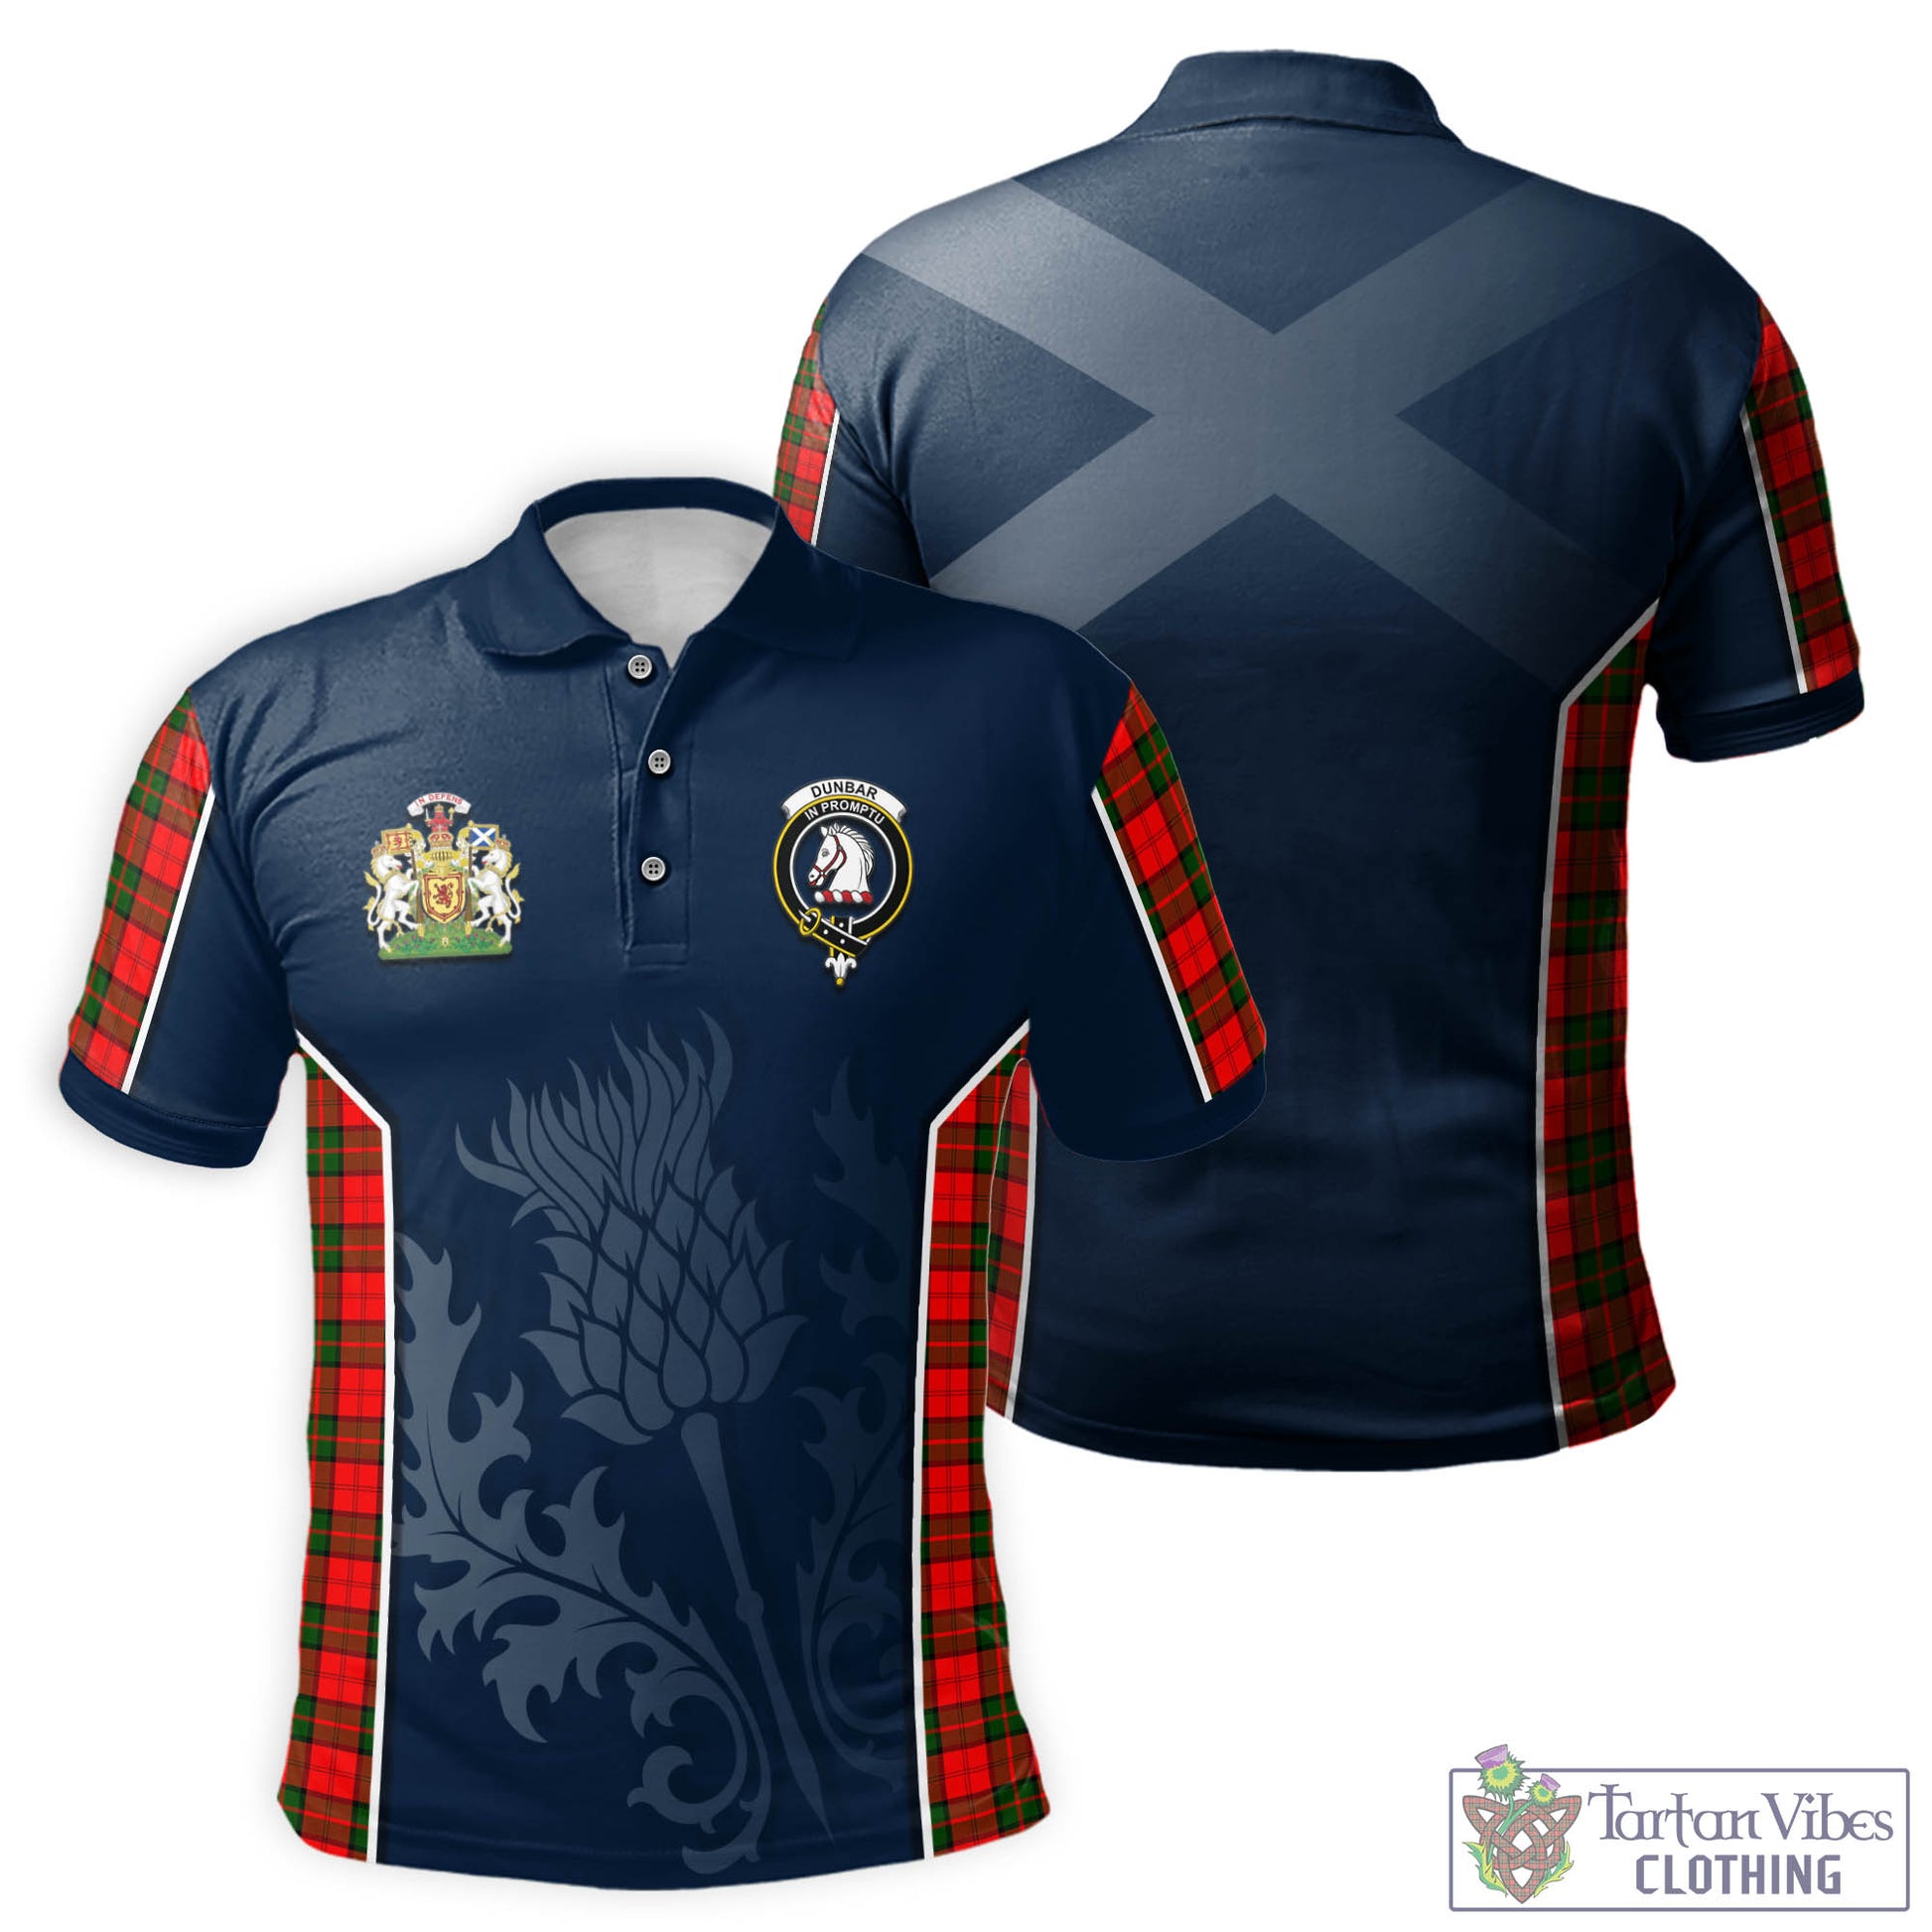 Tartan Vibes Clothing Dunbar Modern Tartan Men's Polo Shirt with Family Crest and Scottish Thistle Vibes Sport Style